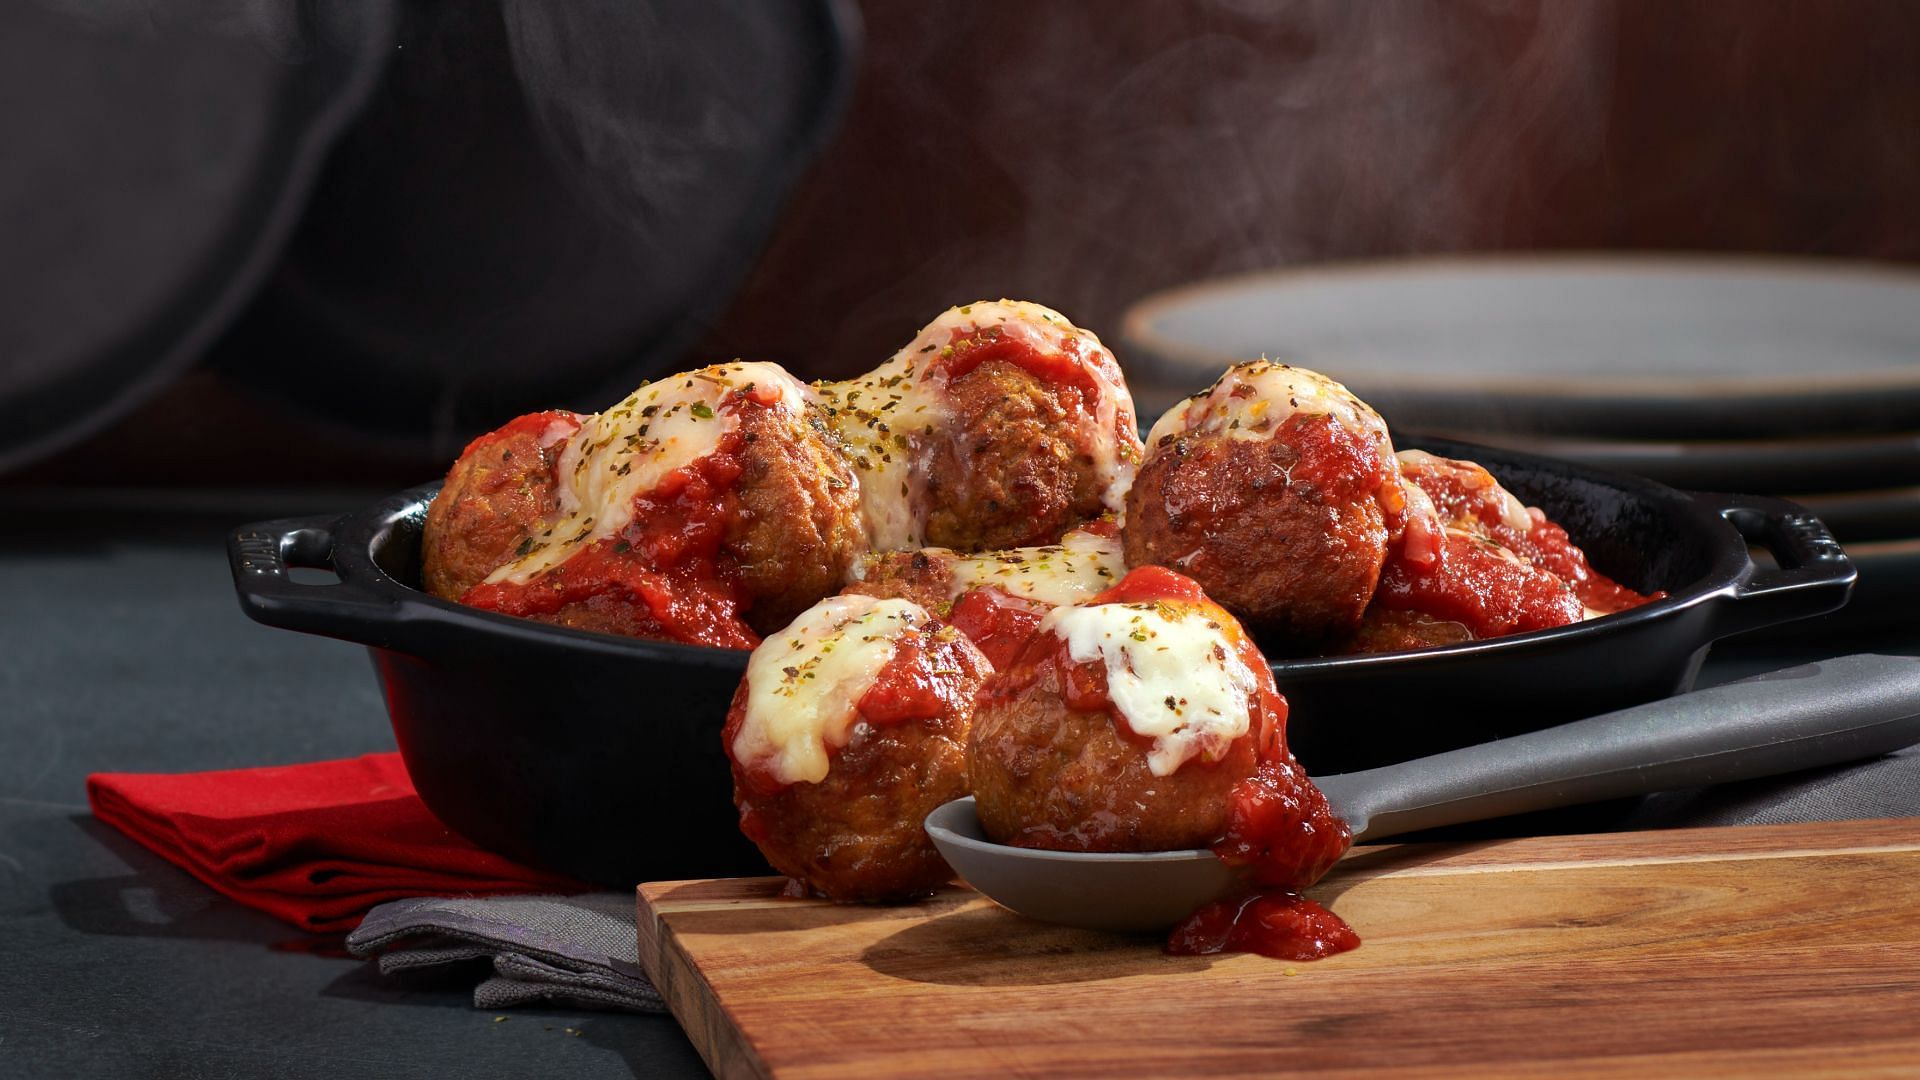 Papa Murphy&rsquo;s Meatballs &amp; Marinara offers ten fully cooked and seasoned Italian beef meatballs, coated in a tangy marinara sauce (Image via Papa Murphy&rsquo;s)